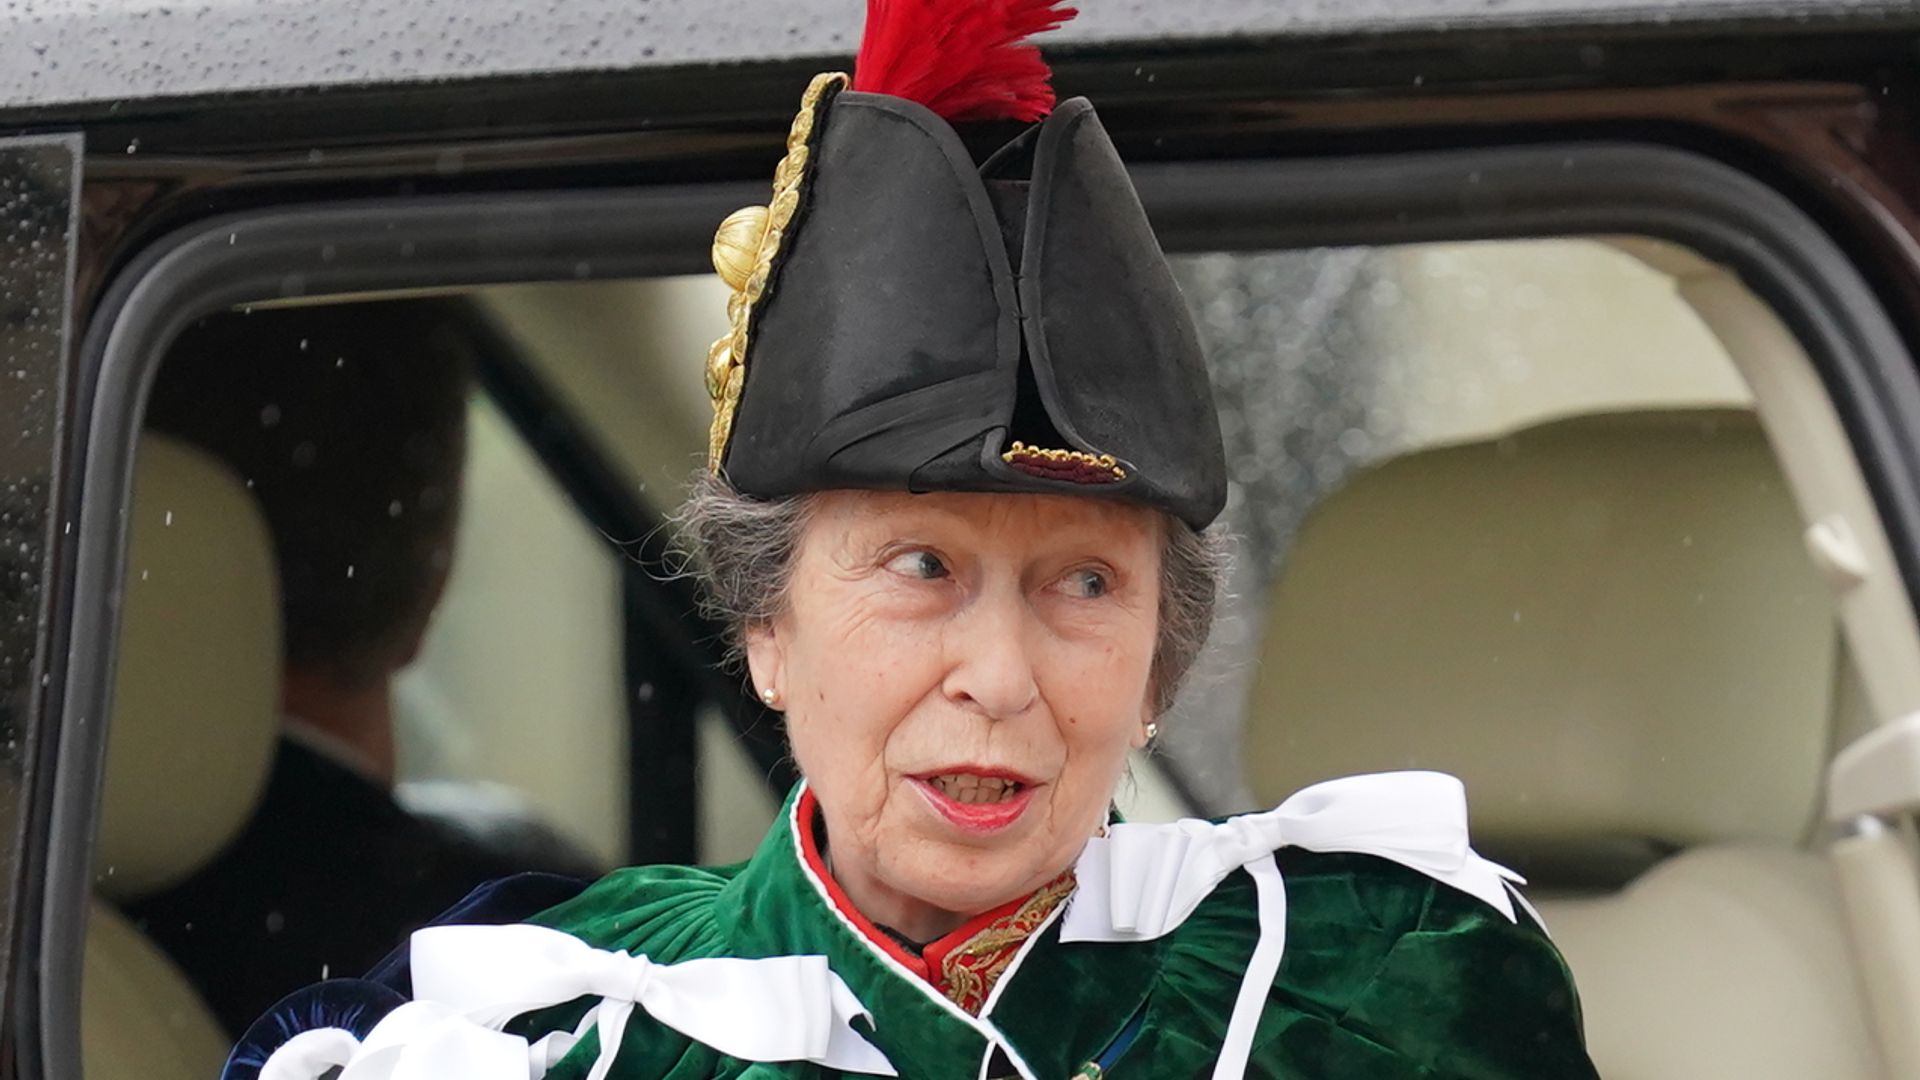 The Princess Royal arrived at the coronation ceremony in a green cape